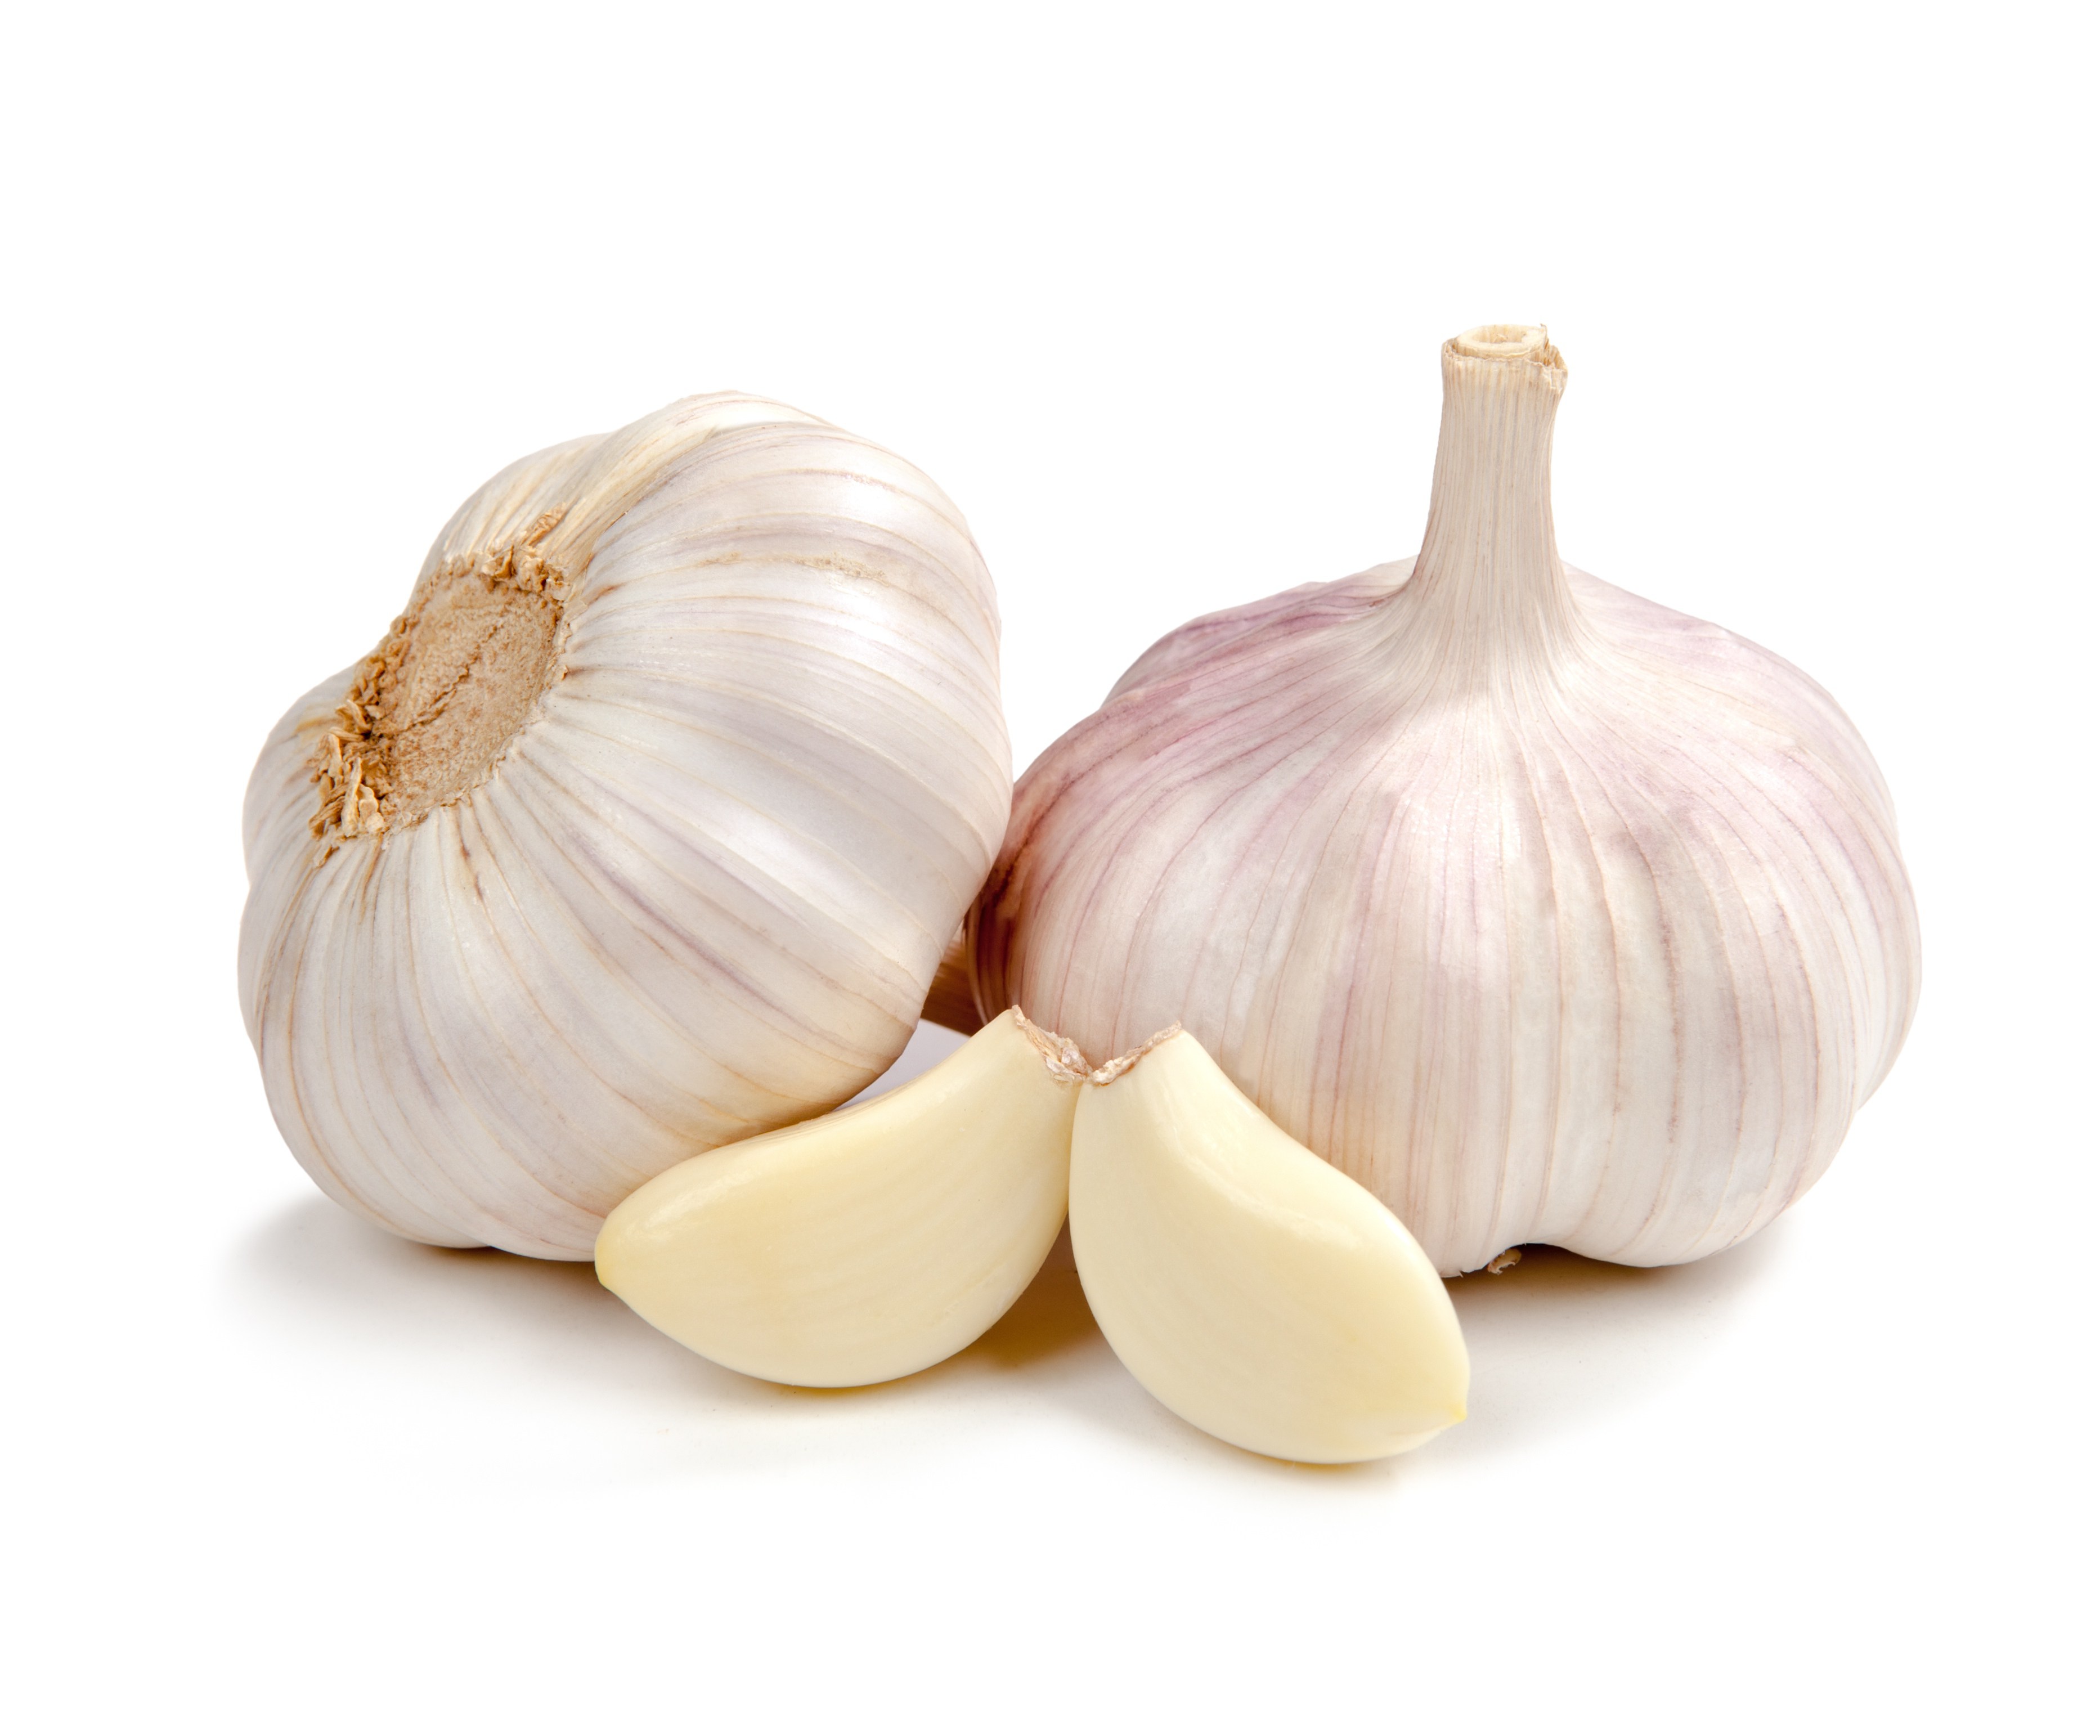 Garlic Nutrition And Health Benefits - Good Whole Food